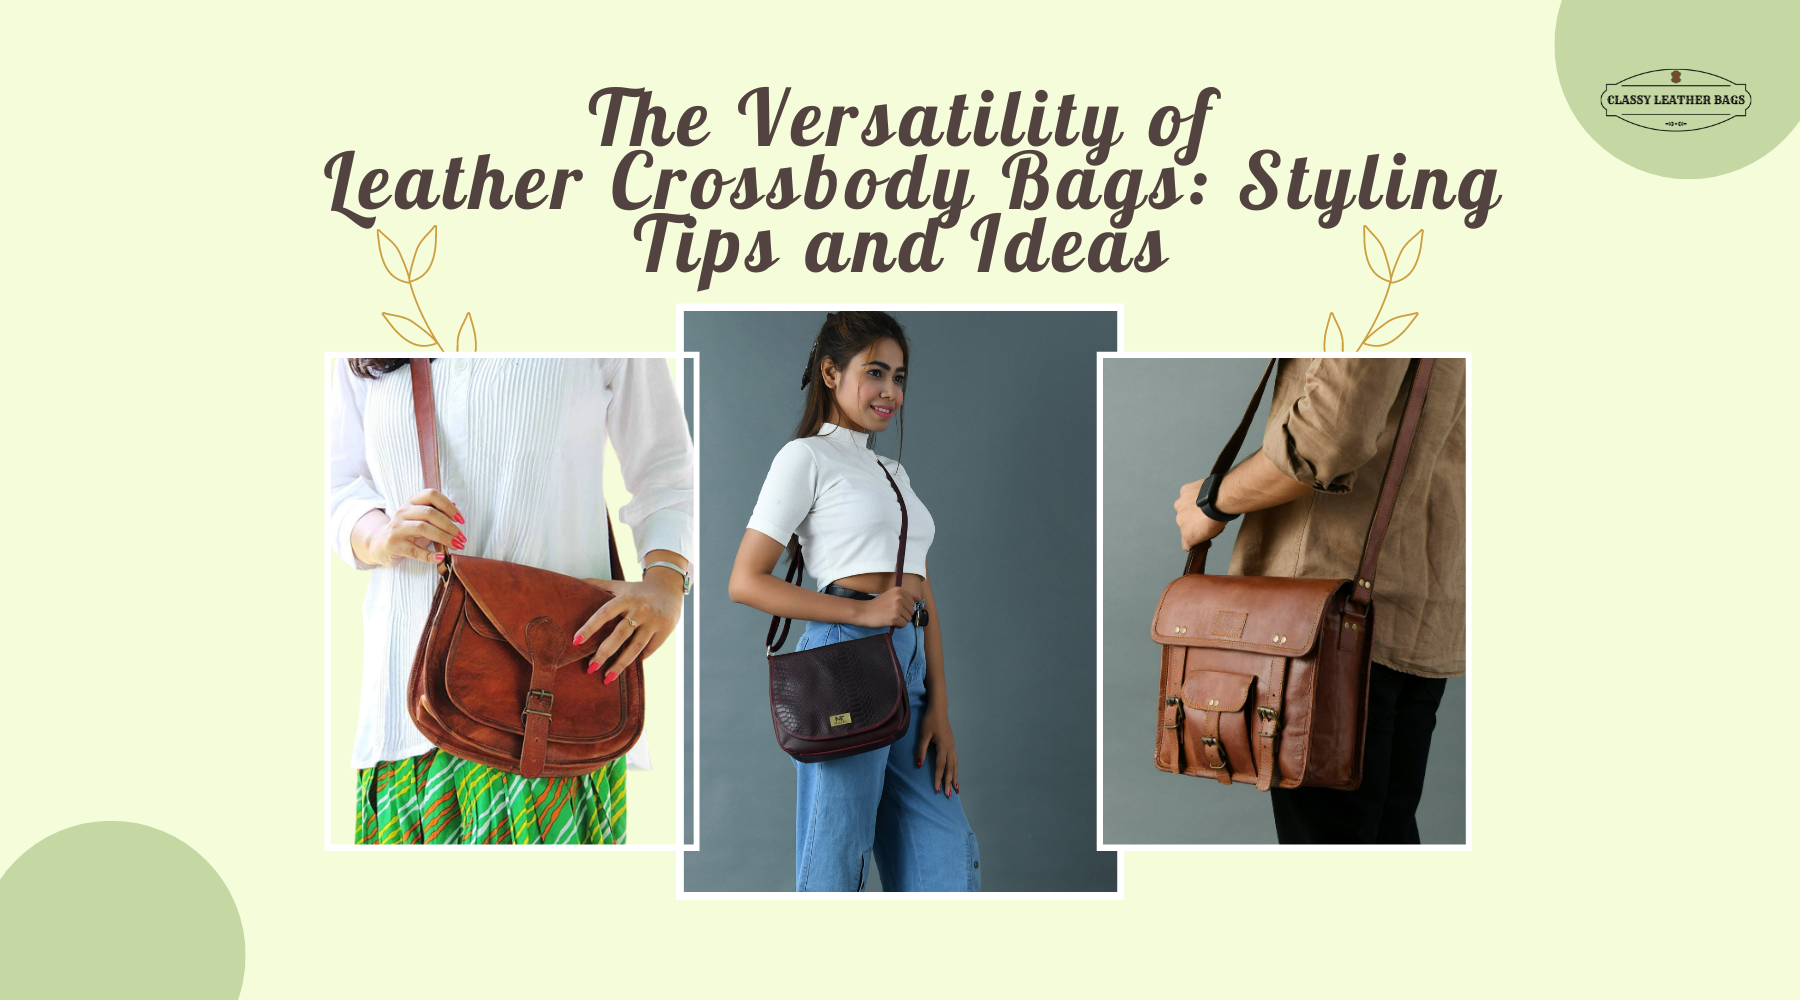 The Versatility of Leather Crossbody Bags: Styling Tips and Ideas